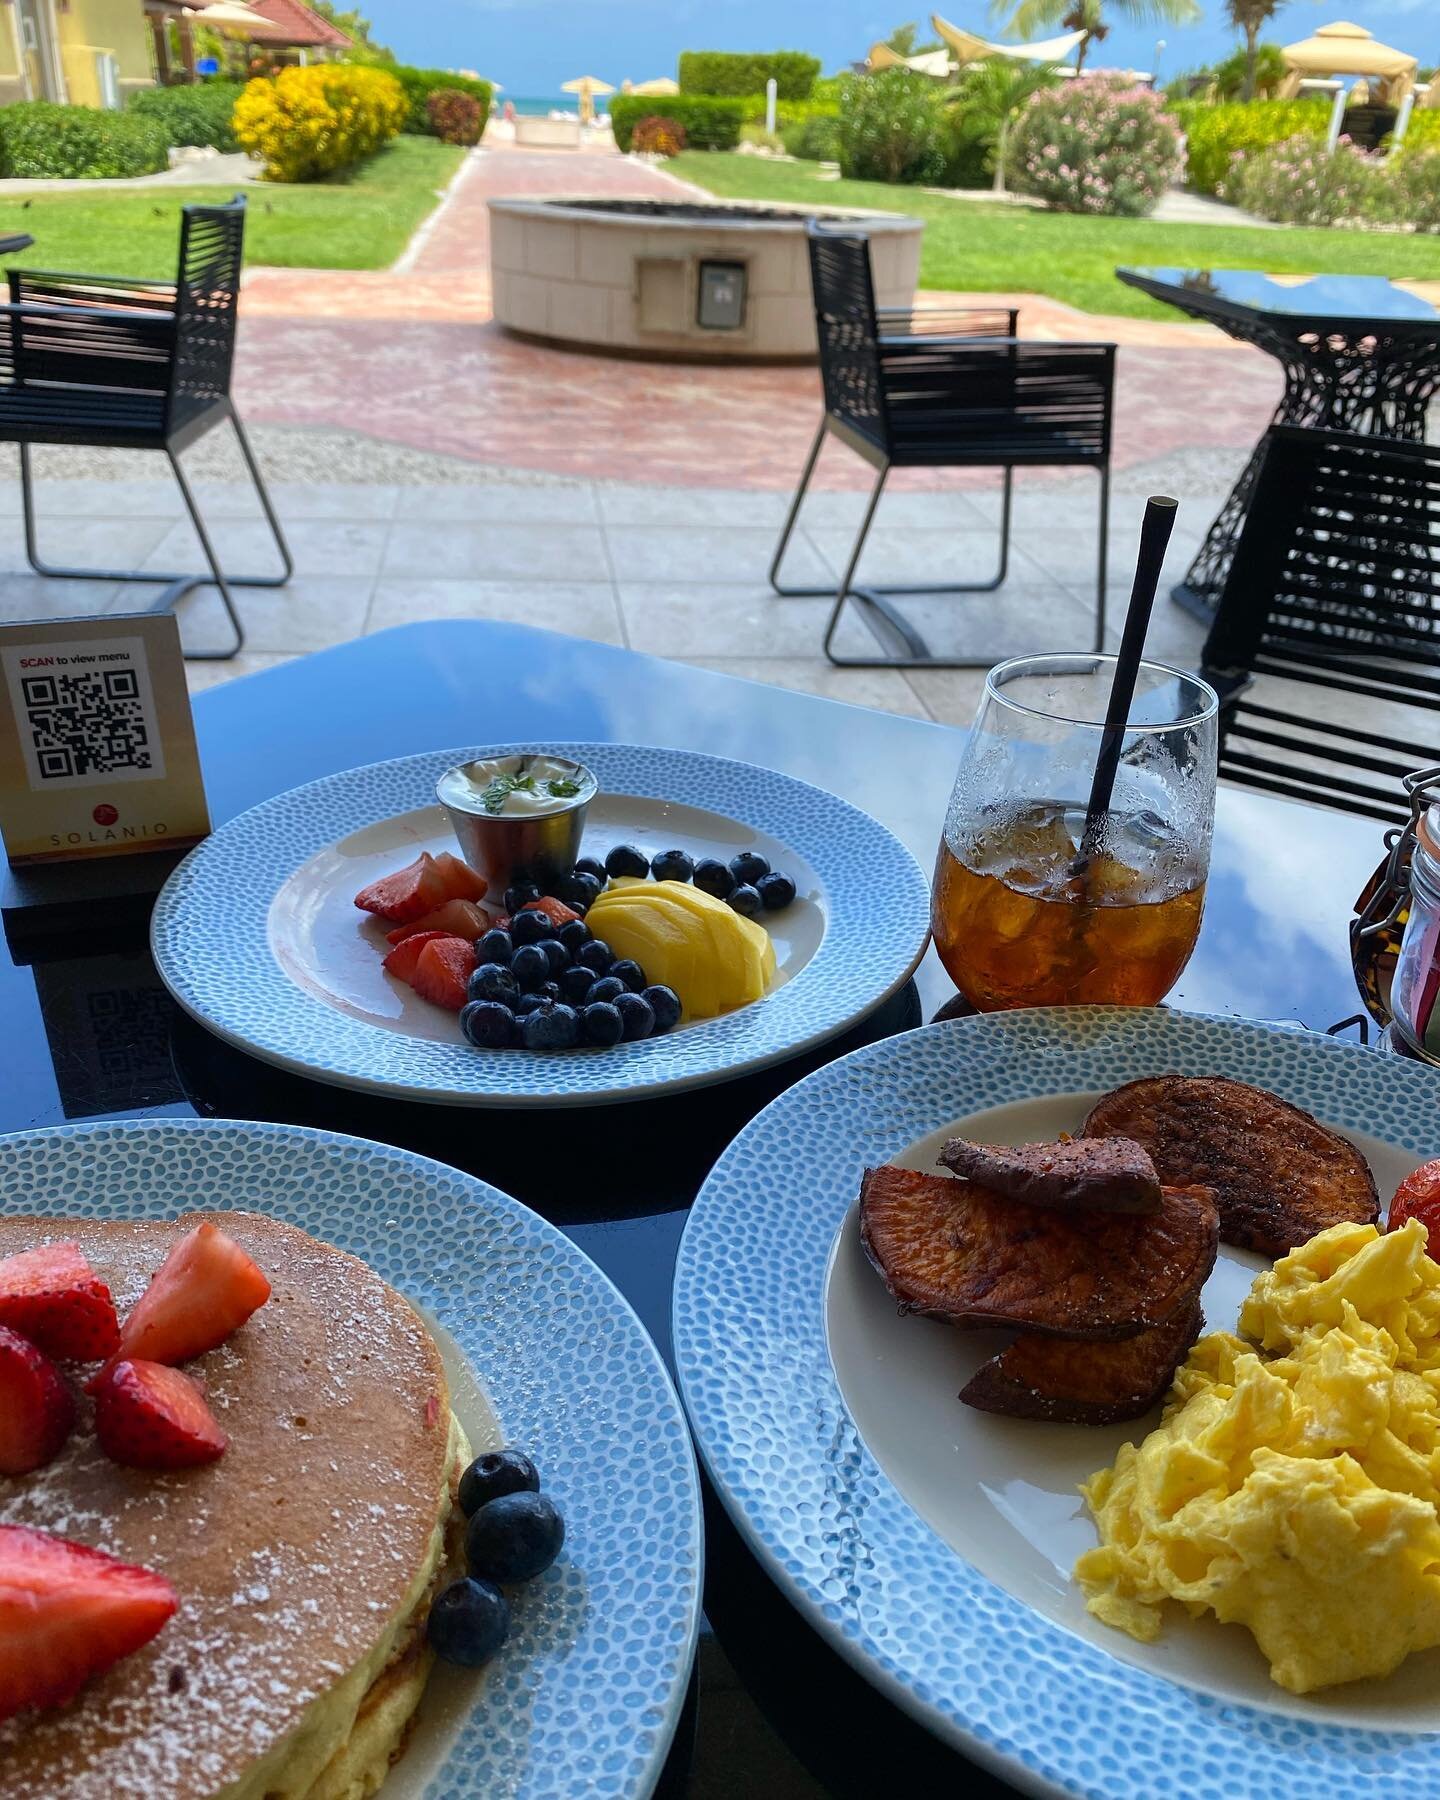 Breakfast in paradise ☀️ 
Not pictured: 4+ more iced coffees 
.
.
.
#melissa_nutrition_ #rd2be #healthyliving #aruba #nutrition #foodasfuel #breakfasttime #wellness #nycfoodie